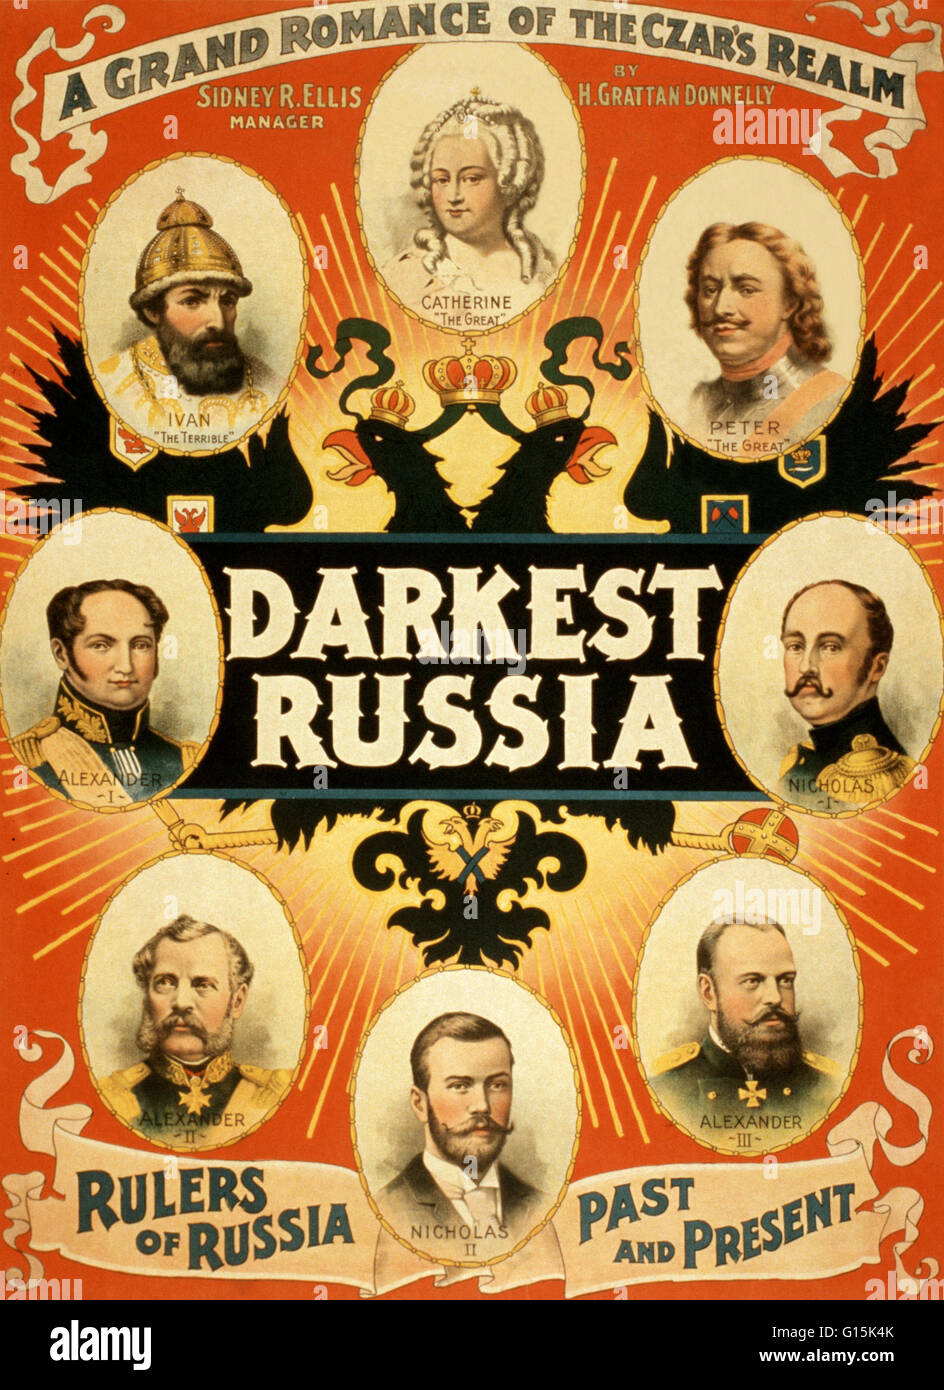 Theater poster for 'Darkest Russia,' a melodrama by Henry Grattan Donnelly. Top row left to right, Ivan the Terrible, Catherine the Great, Peter the Great. Middle row left to right, Alexander I, Nicholas I. Bottom row left to right, Alexander II, Nicholas Stock Photo